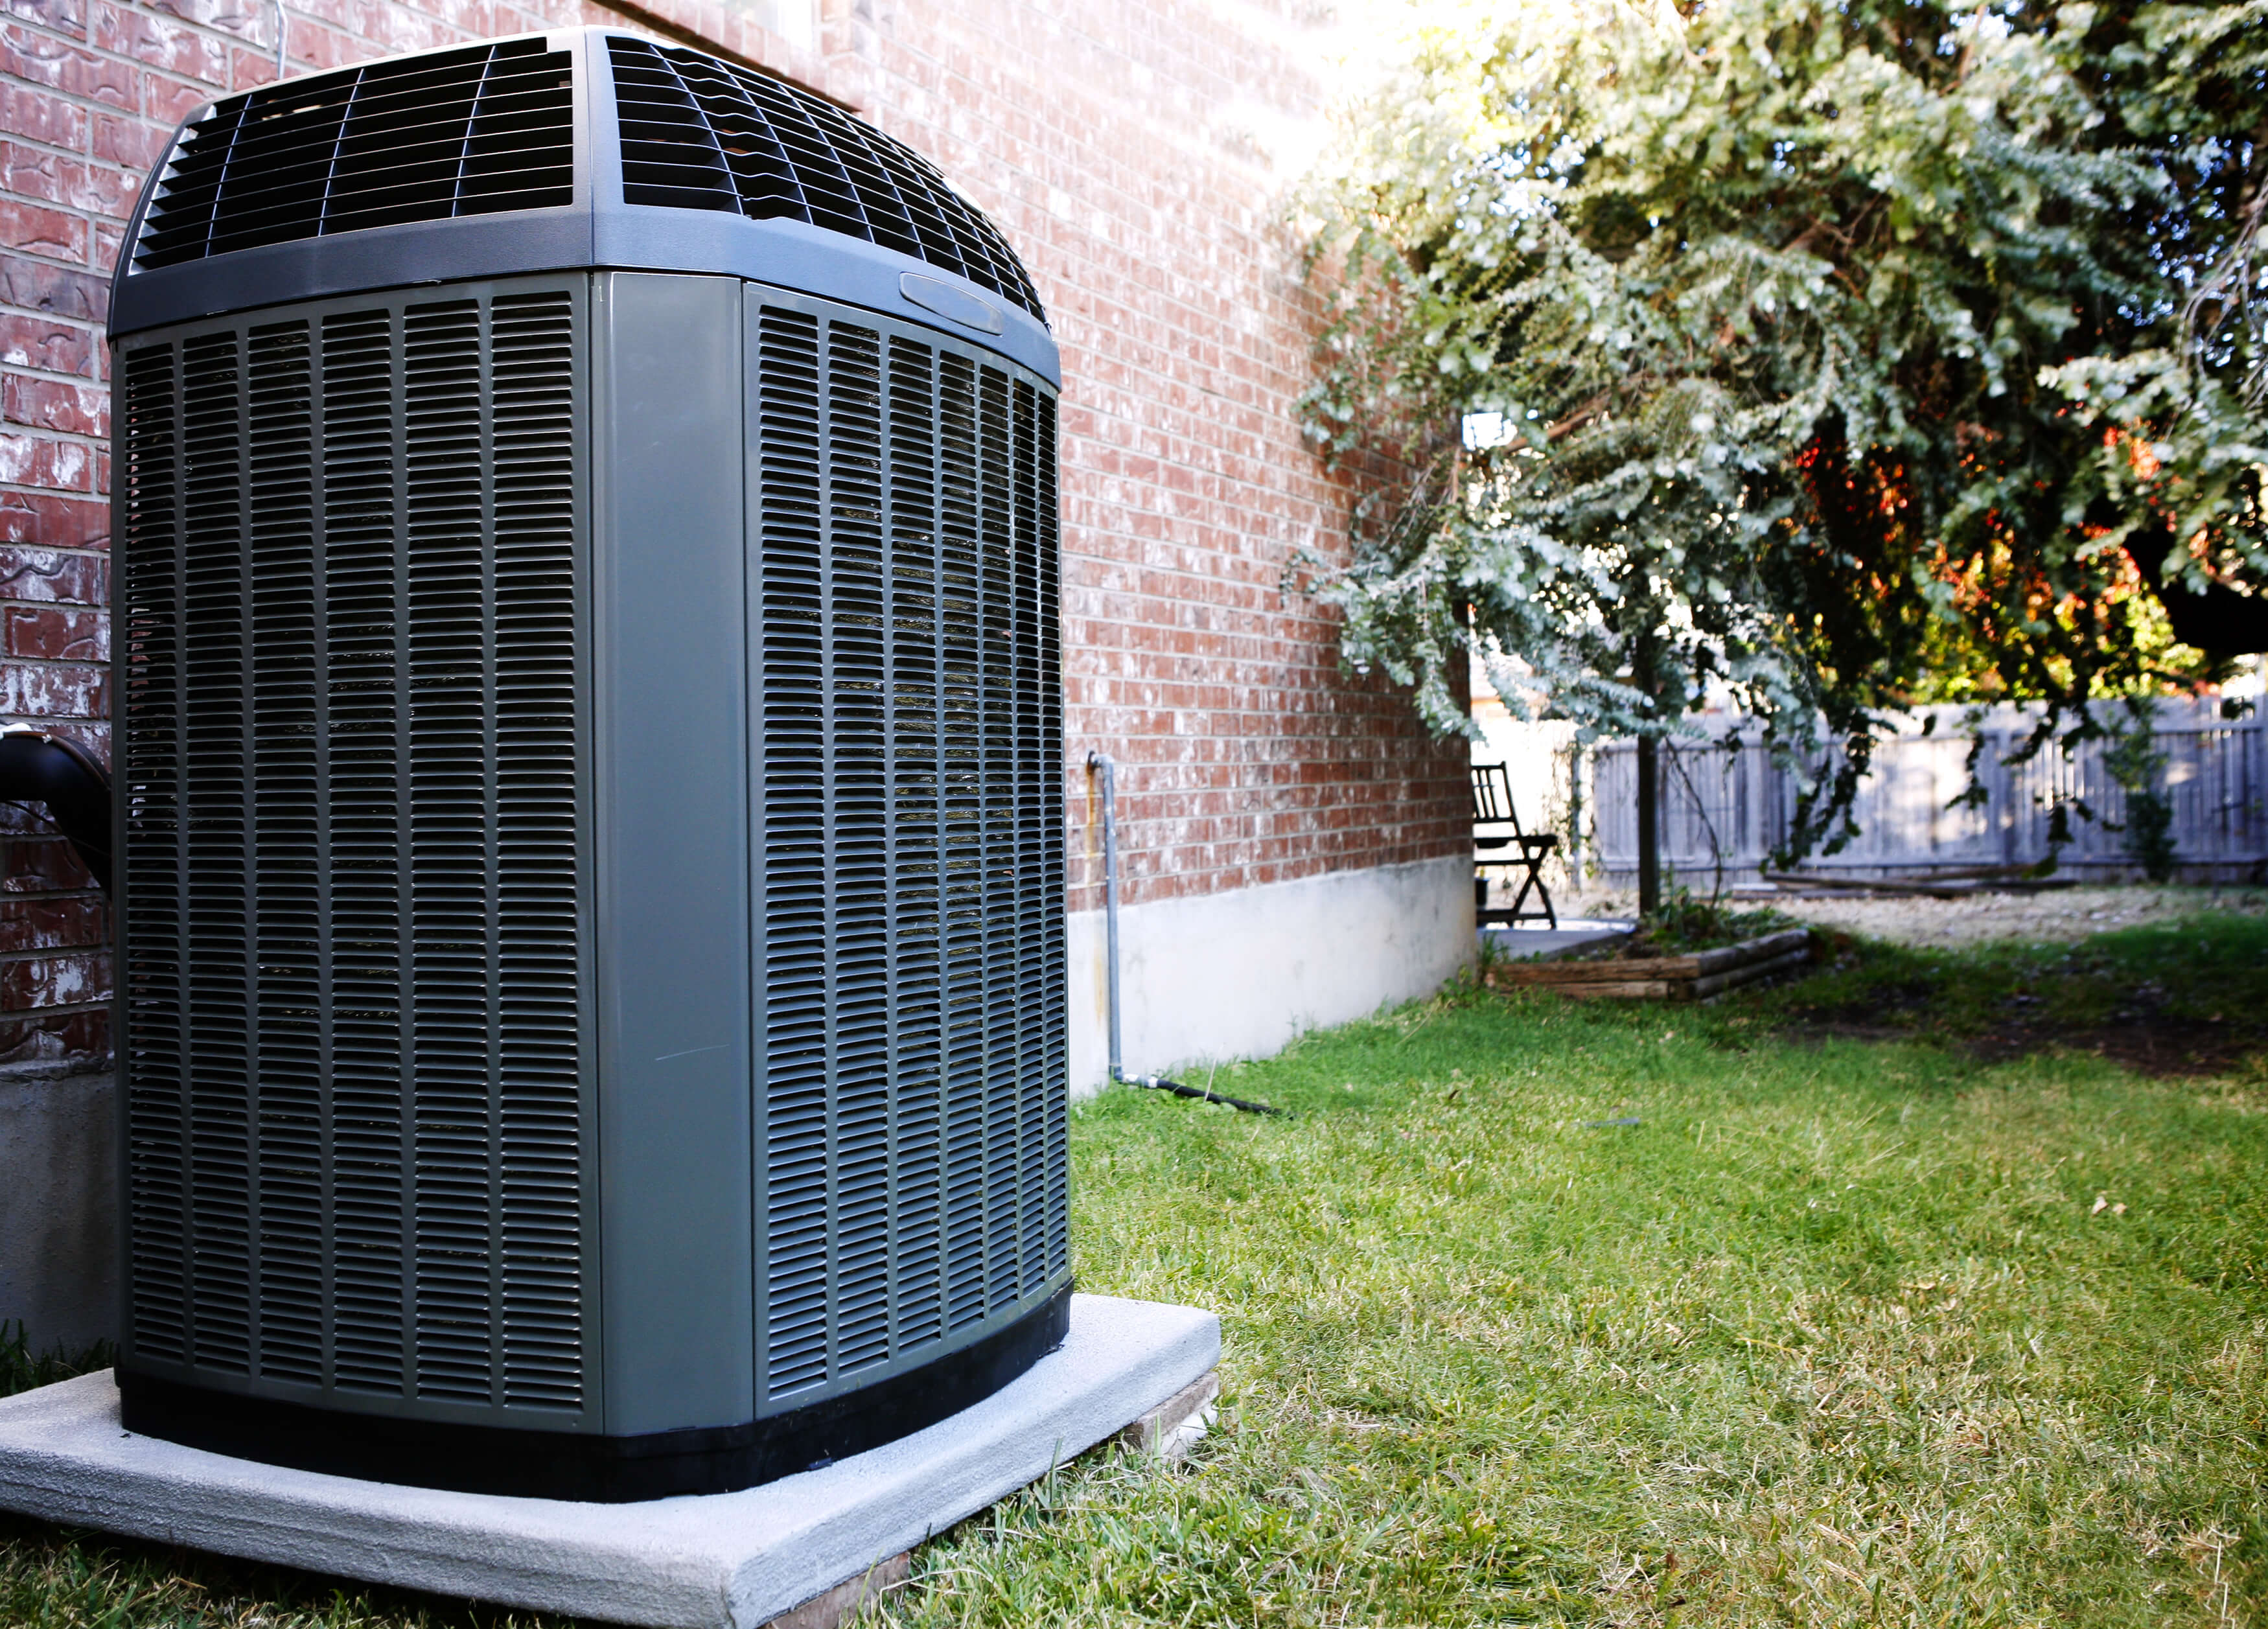 Get an AC tune-up in Loomis by the experts at Crystal Blue!